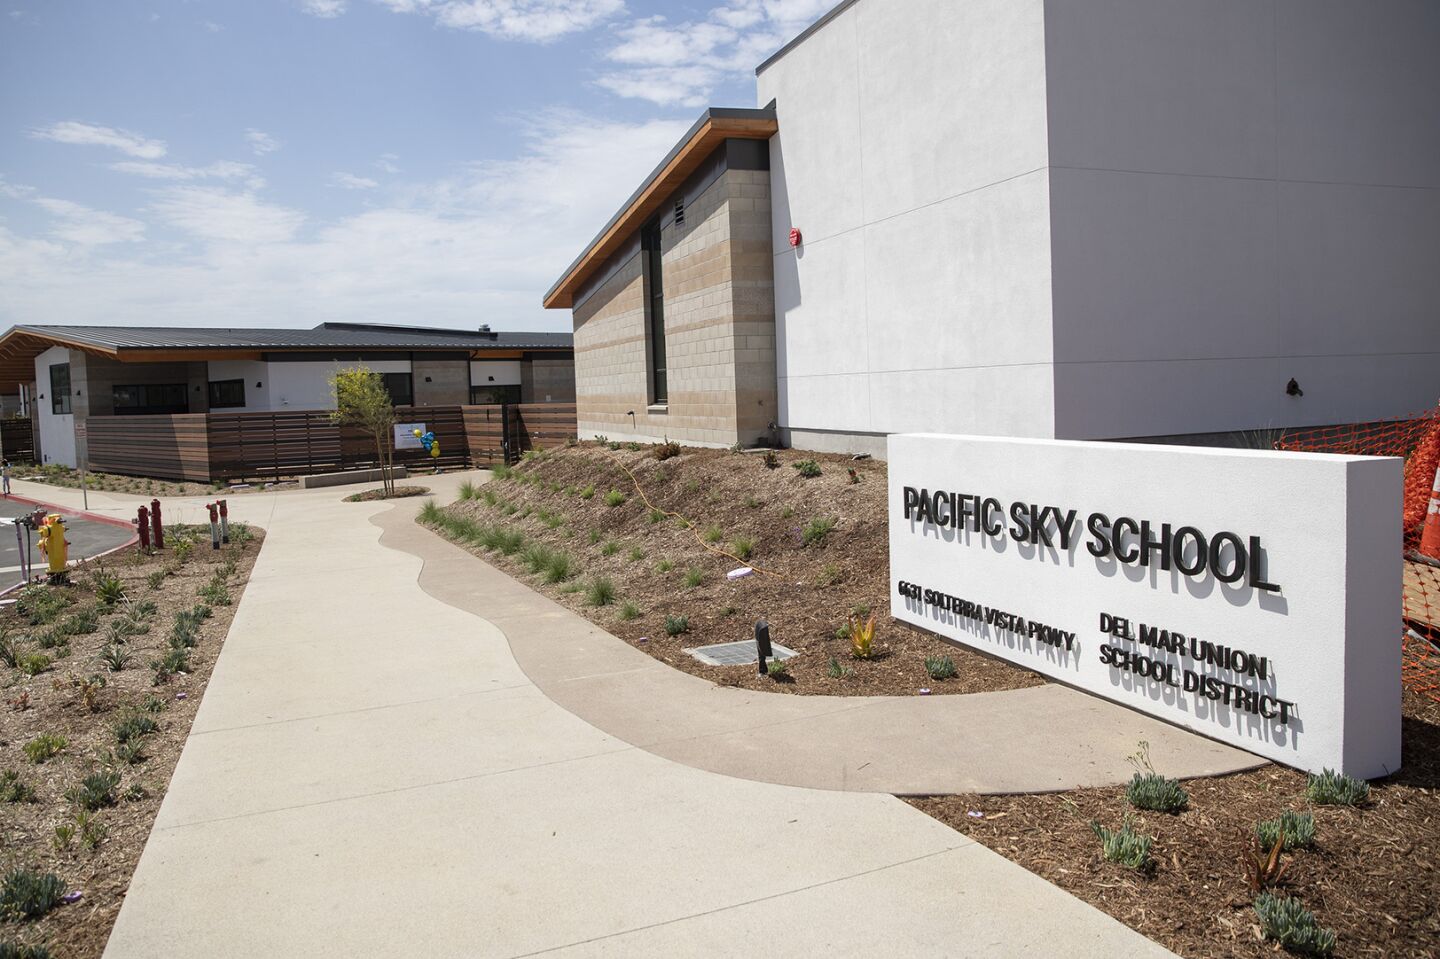 Pacific Sky School is the newest addition to the Del Mar Union School District